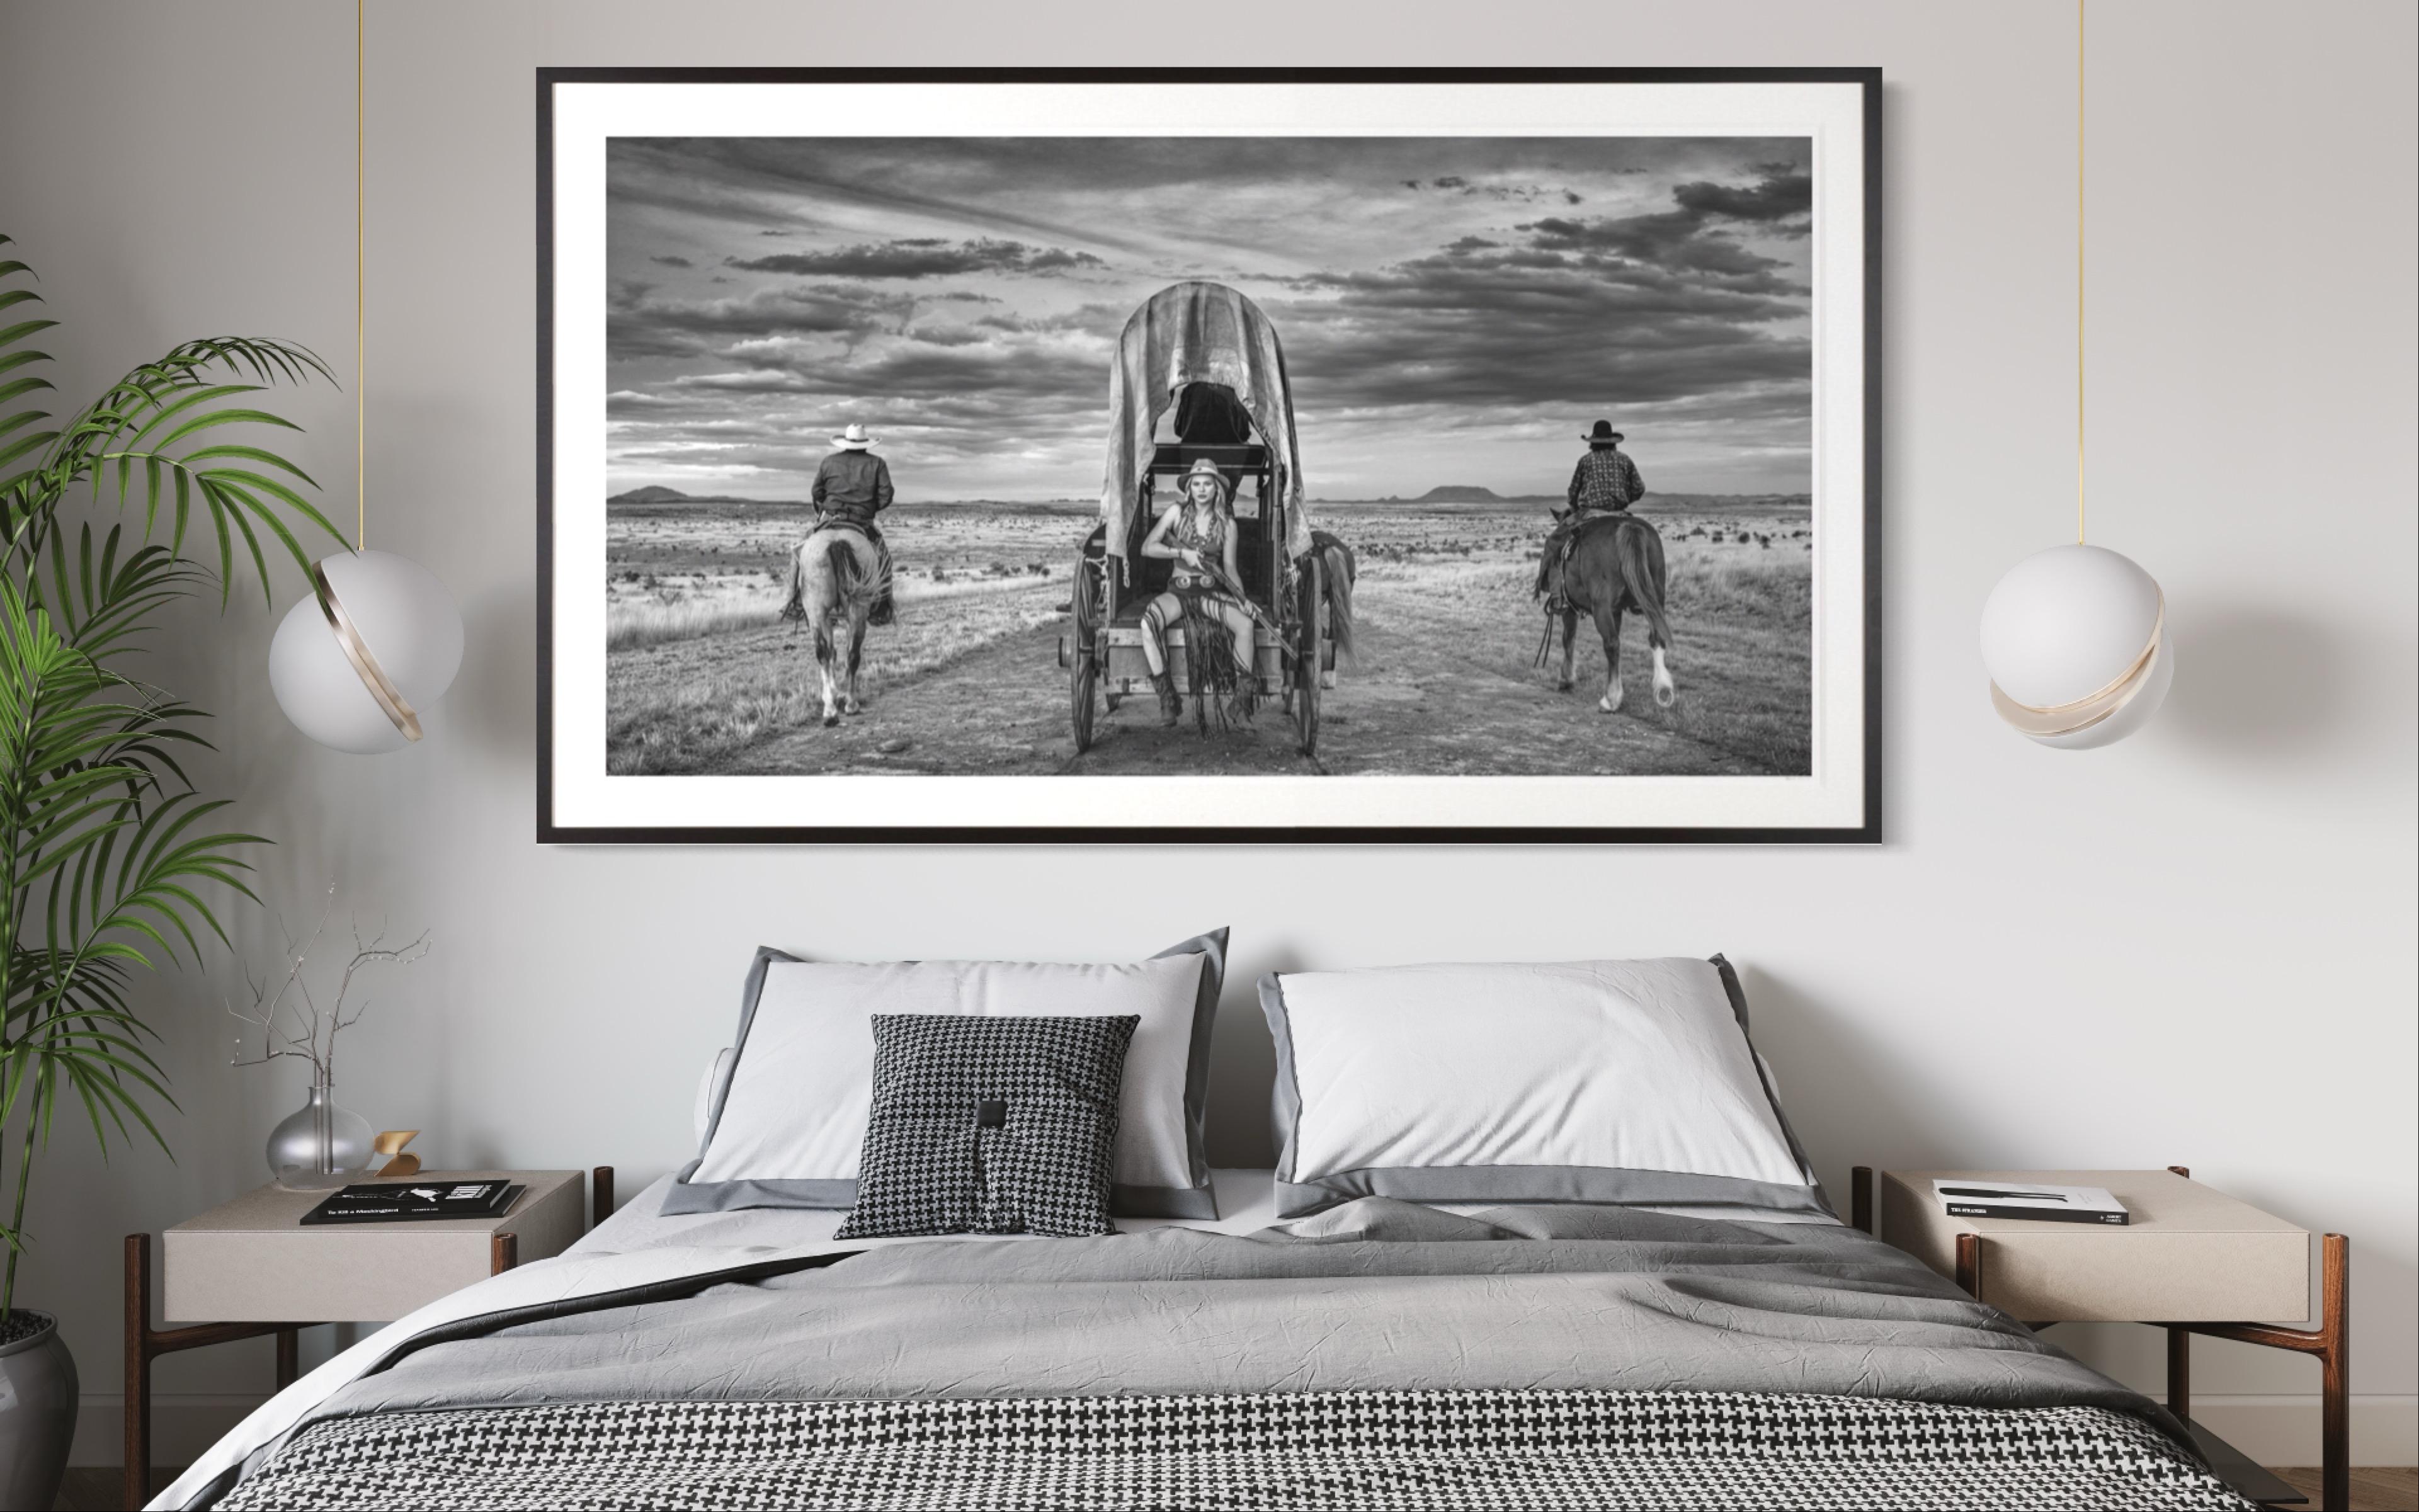 Amarillo By Morning / Sexy Framed Western Photo  - Contemporary Photograph by David Yarrow